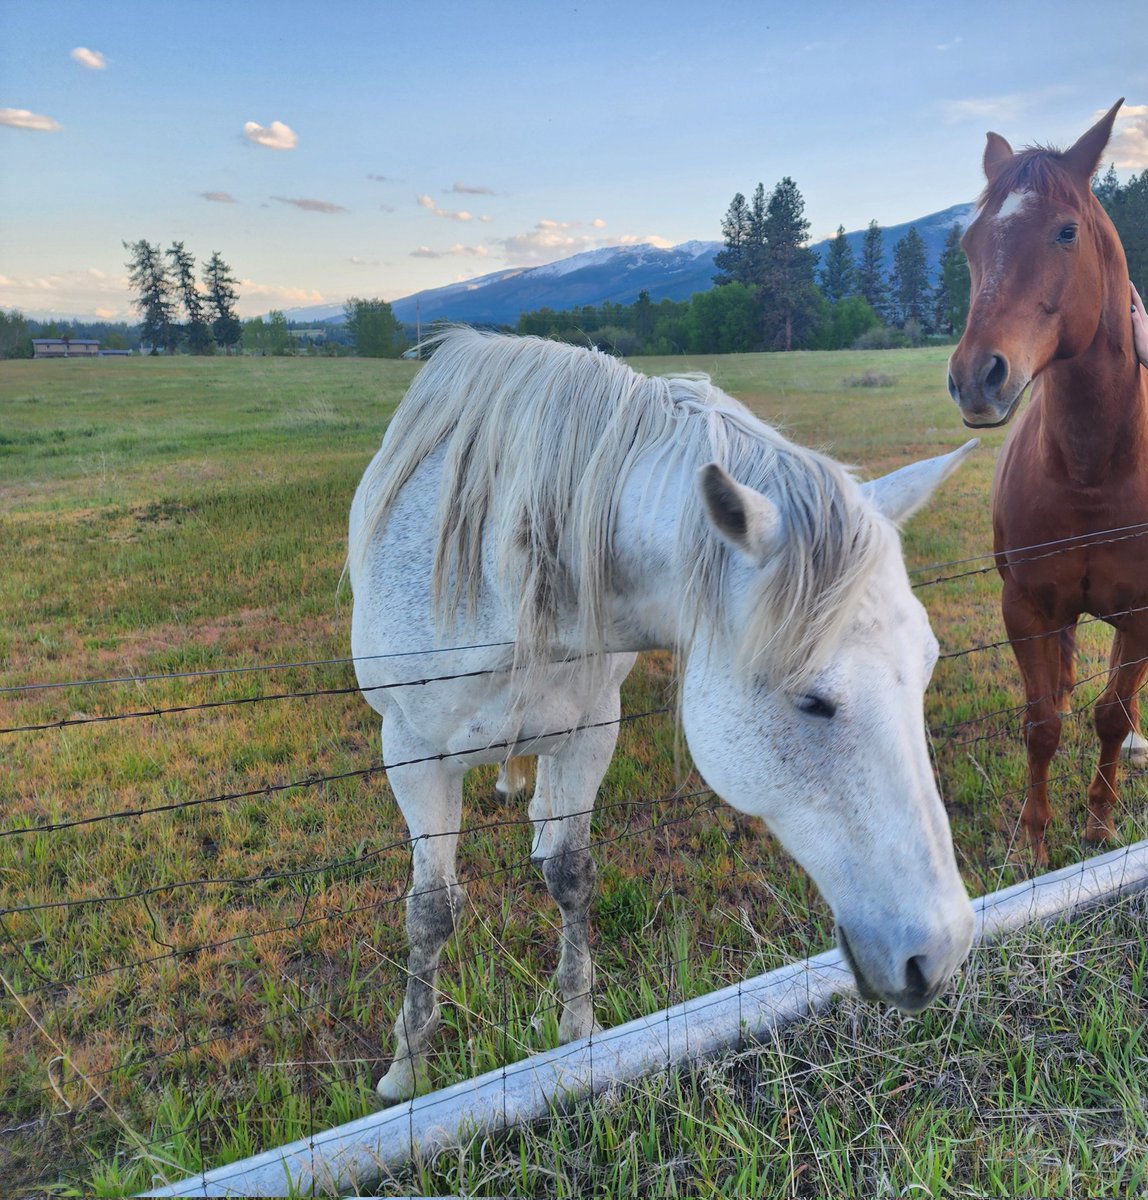 Horses are the best neighbors to have. They are quiet and they don't want to eat you.